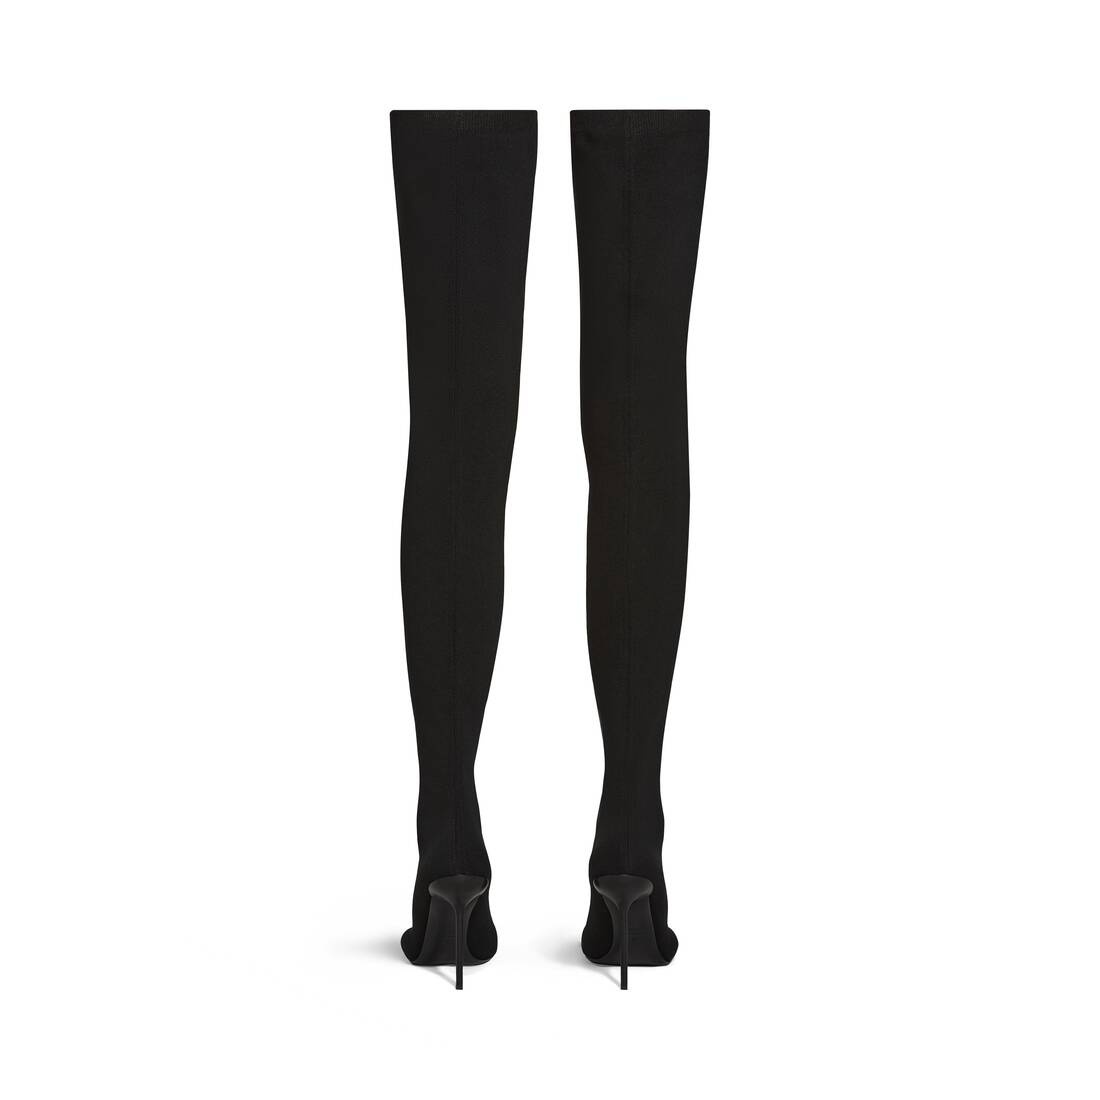 Women's Anatomic 110mm Over-the-knee Boot in Black - 5